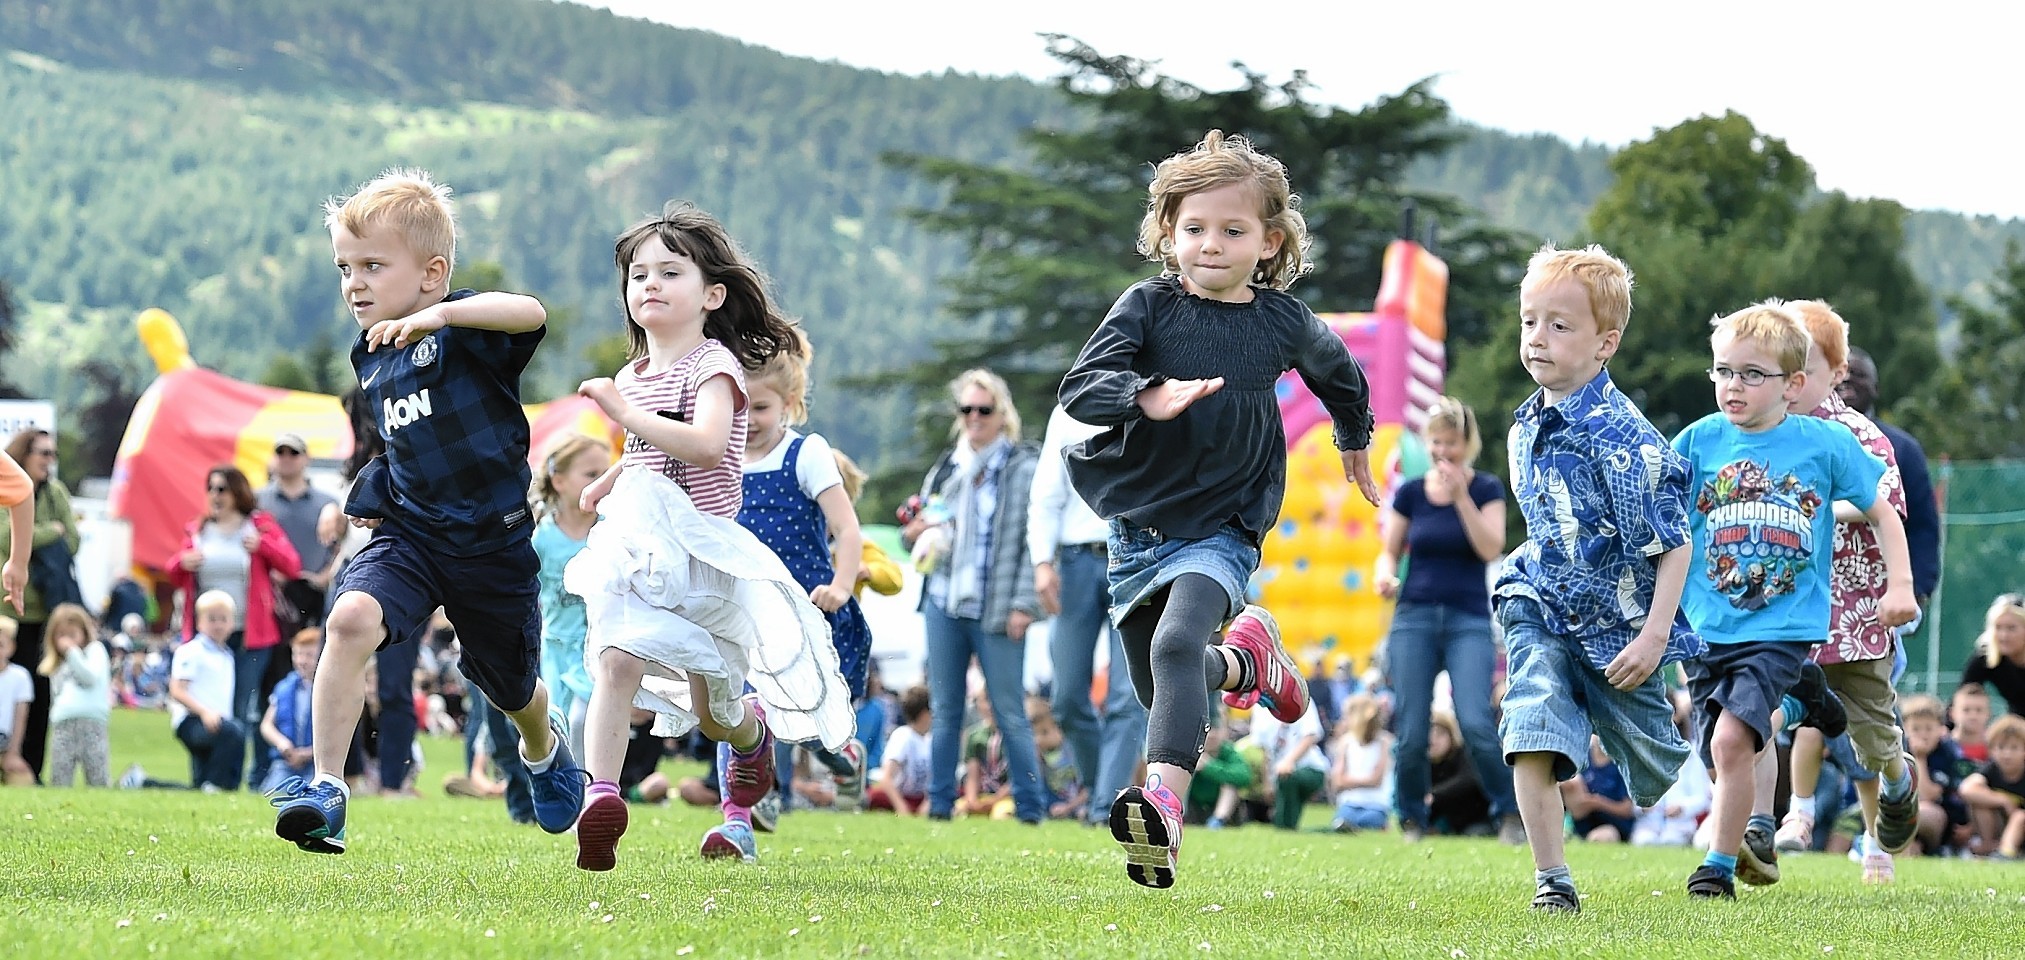 Aboyne Highland Games - The children's race. Picture by COLIN RENNIE